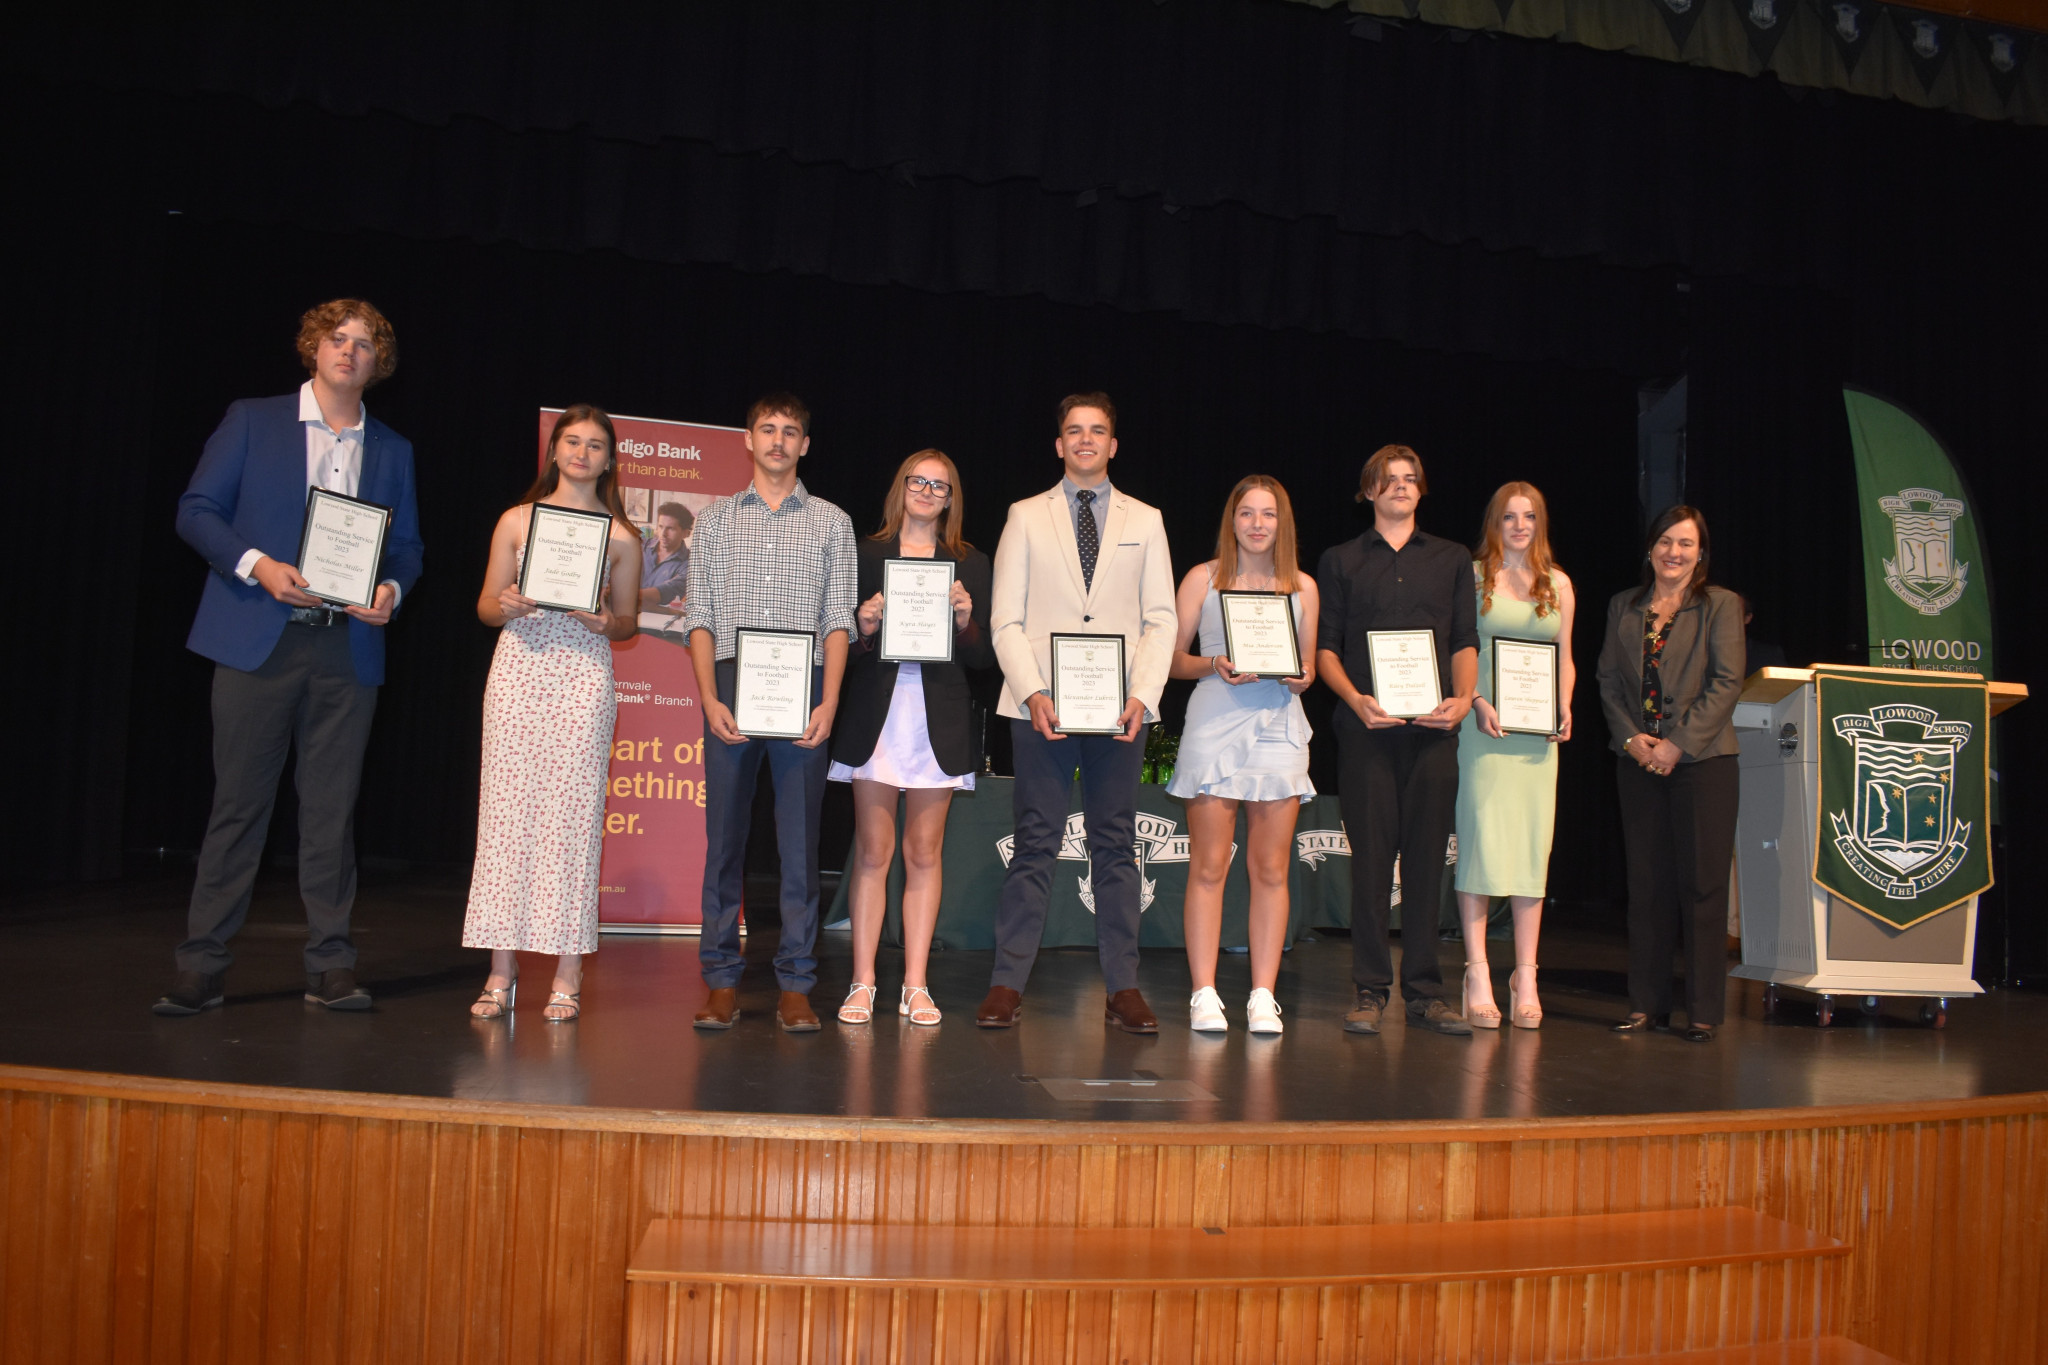 Nicholas Miller, Jade Godby, Jack Rowling, Kyra Hayes, Alexander Lukritz, Mia icholas Miller, Jade Godby, Jack Rowling, Kyra Hayes, Alexander Lukritz, Mia Anderson, Riley Dalzell and Lauren Sheppard were recognised for their service to football.